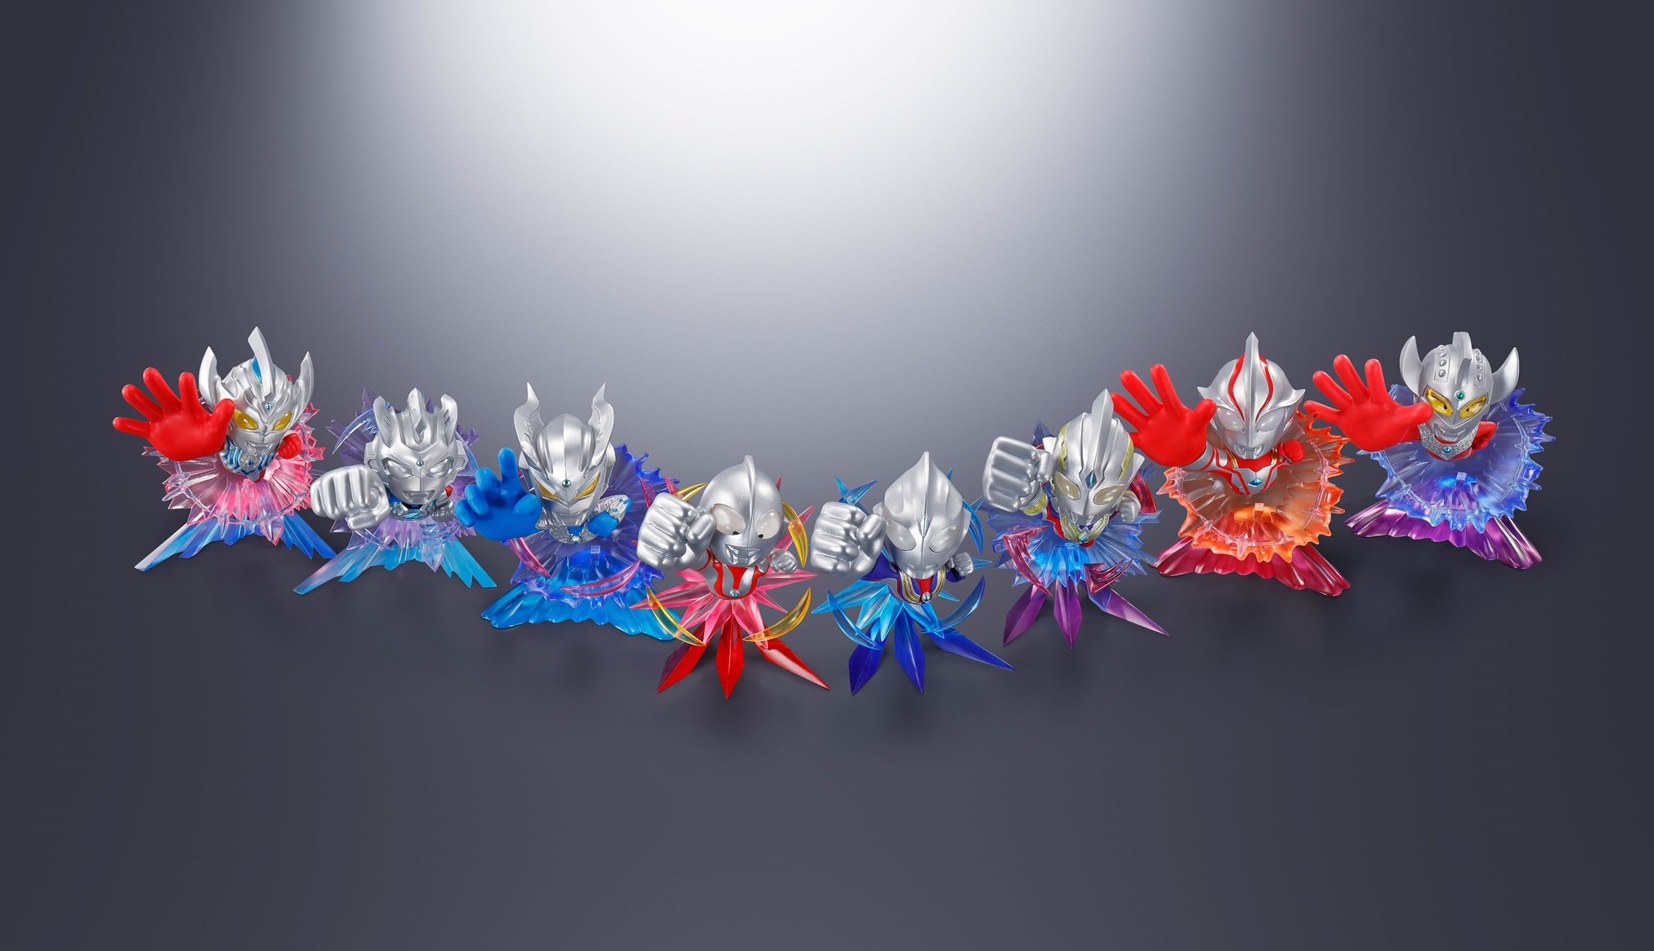 【Event pre-sale item】TAMASHII NATIONS BOX Ultraman ARTlized -We've come our Ultraman- All 8 types (+ 1 secret type)Japan retail price: 1,000 yen (excluding tax)